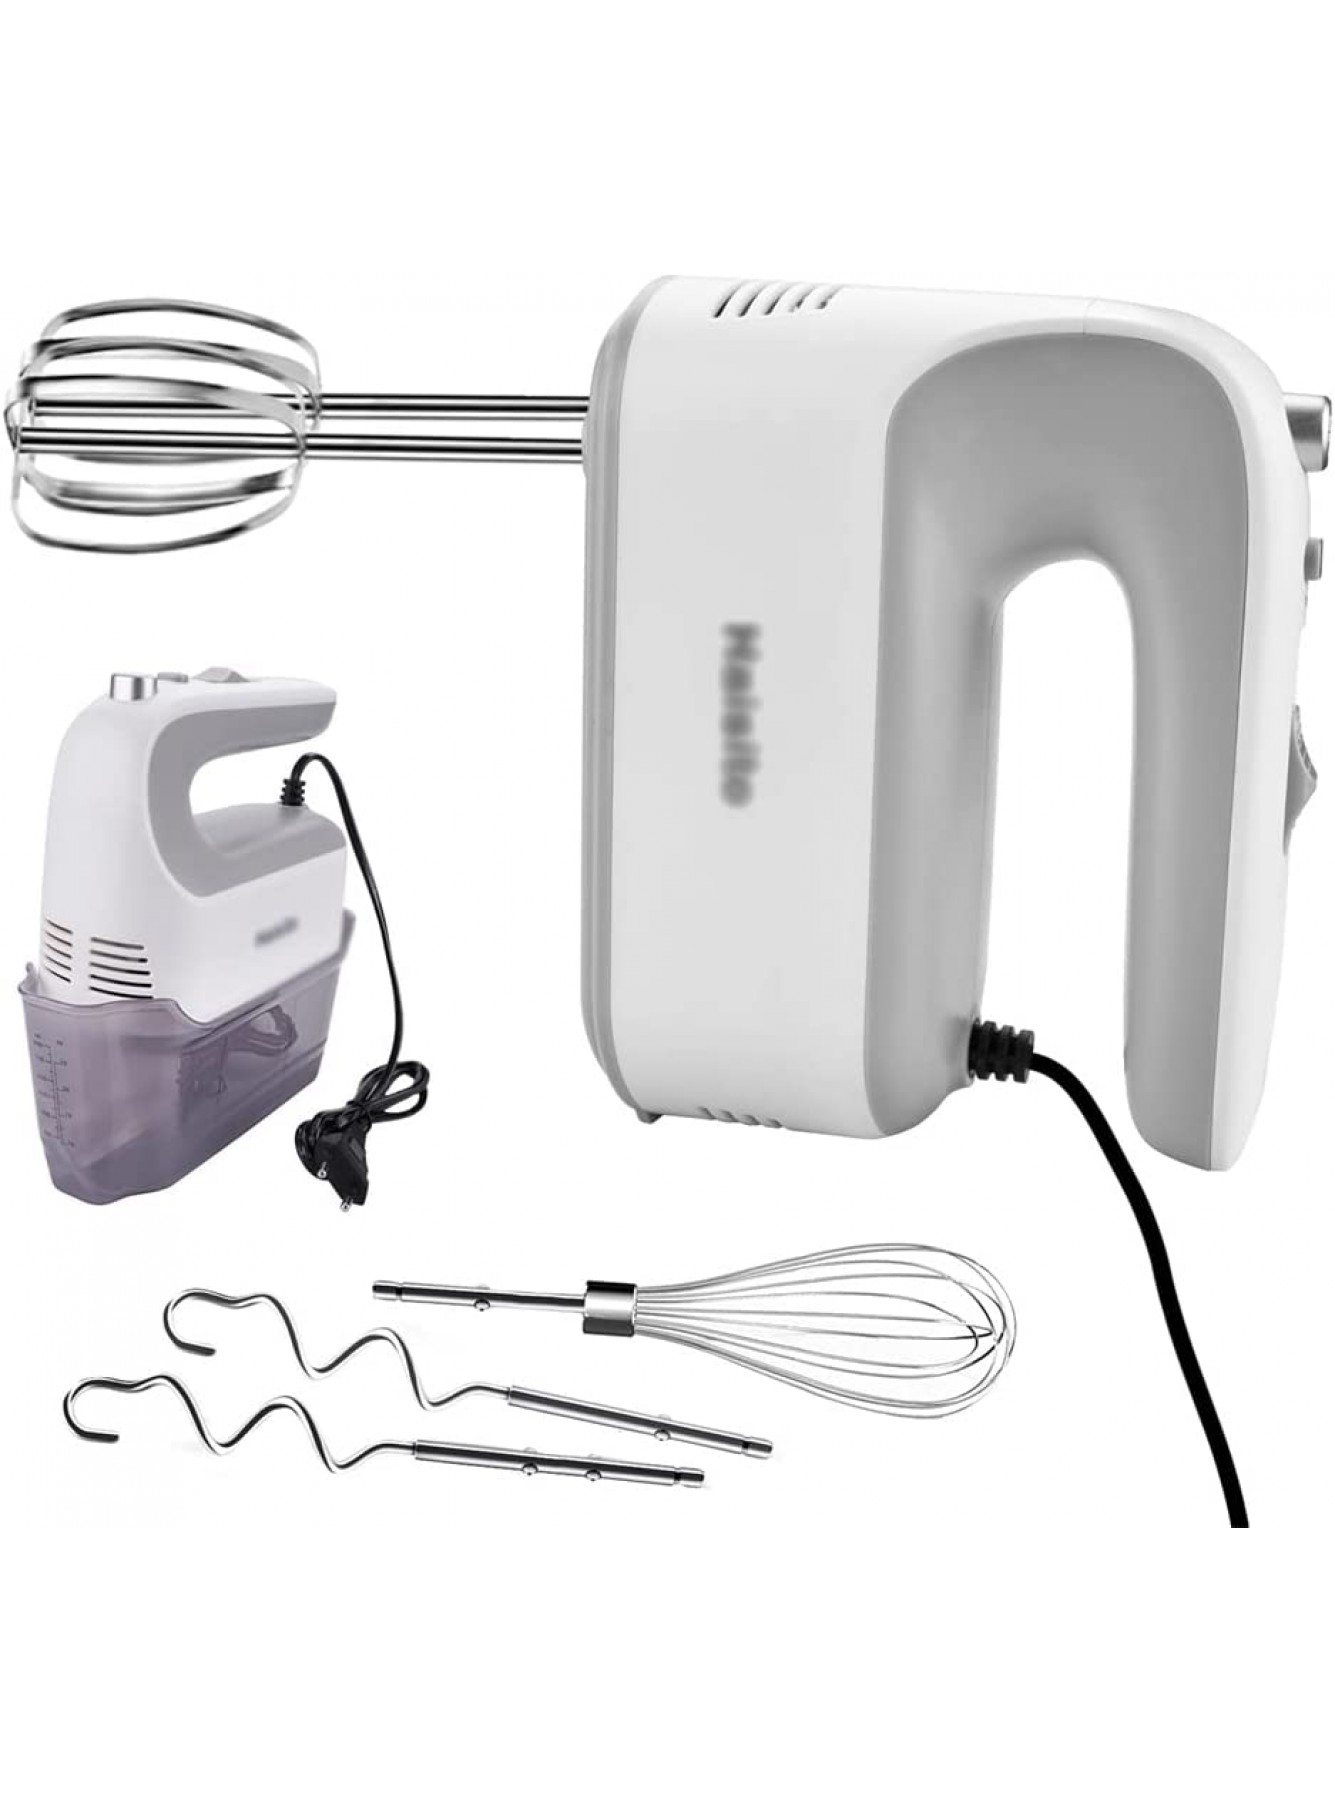 WIONC 350W Electric Hand Mixer 5 Speed Food Blender Handheld Mixer Egg Beater Automatic Cream Color : A Size : As the picture shows B09RWM3JBD